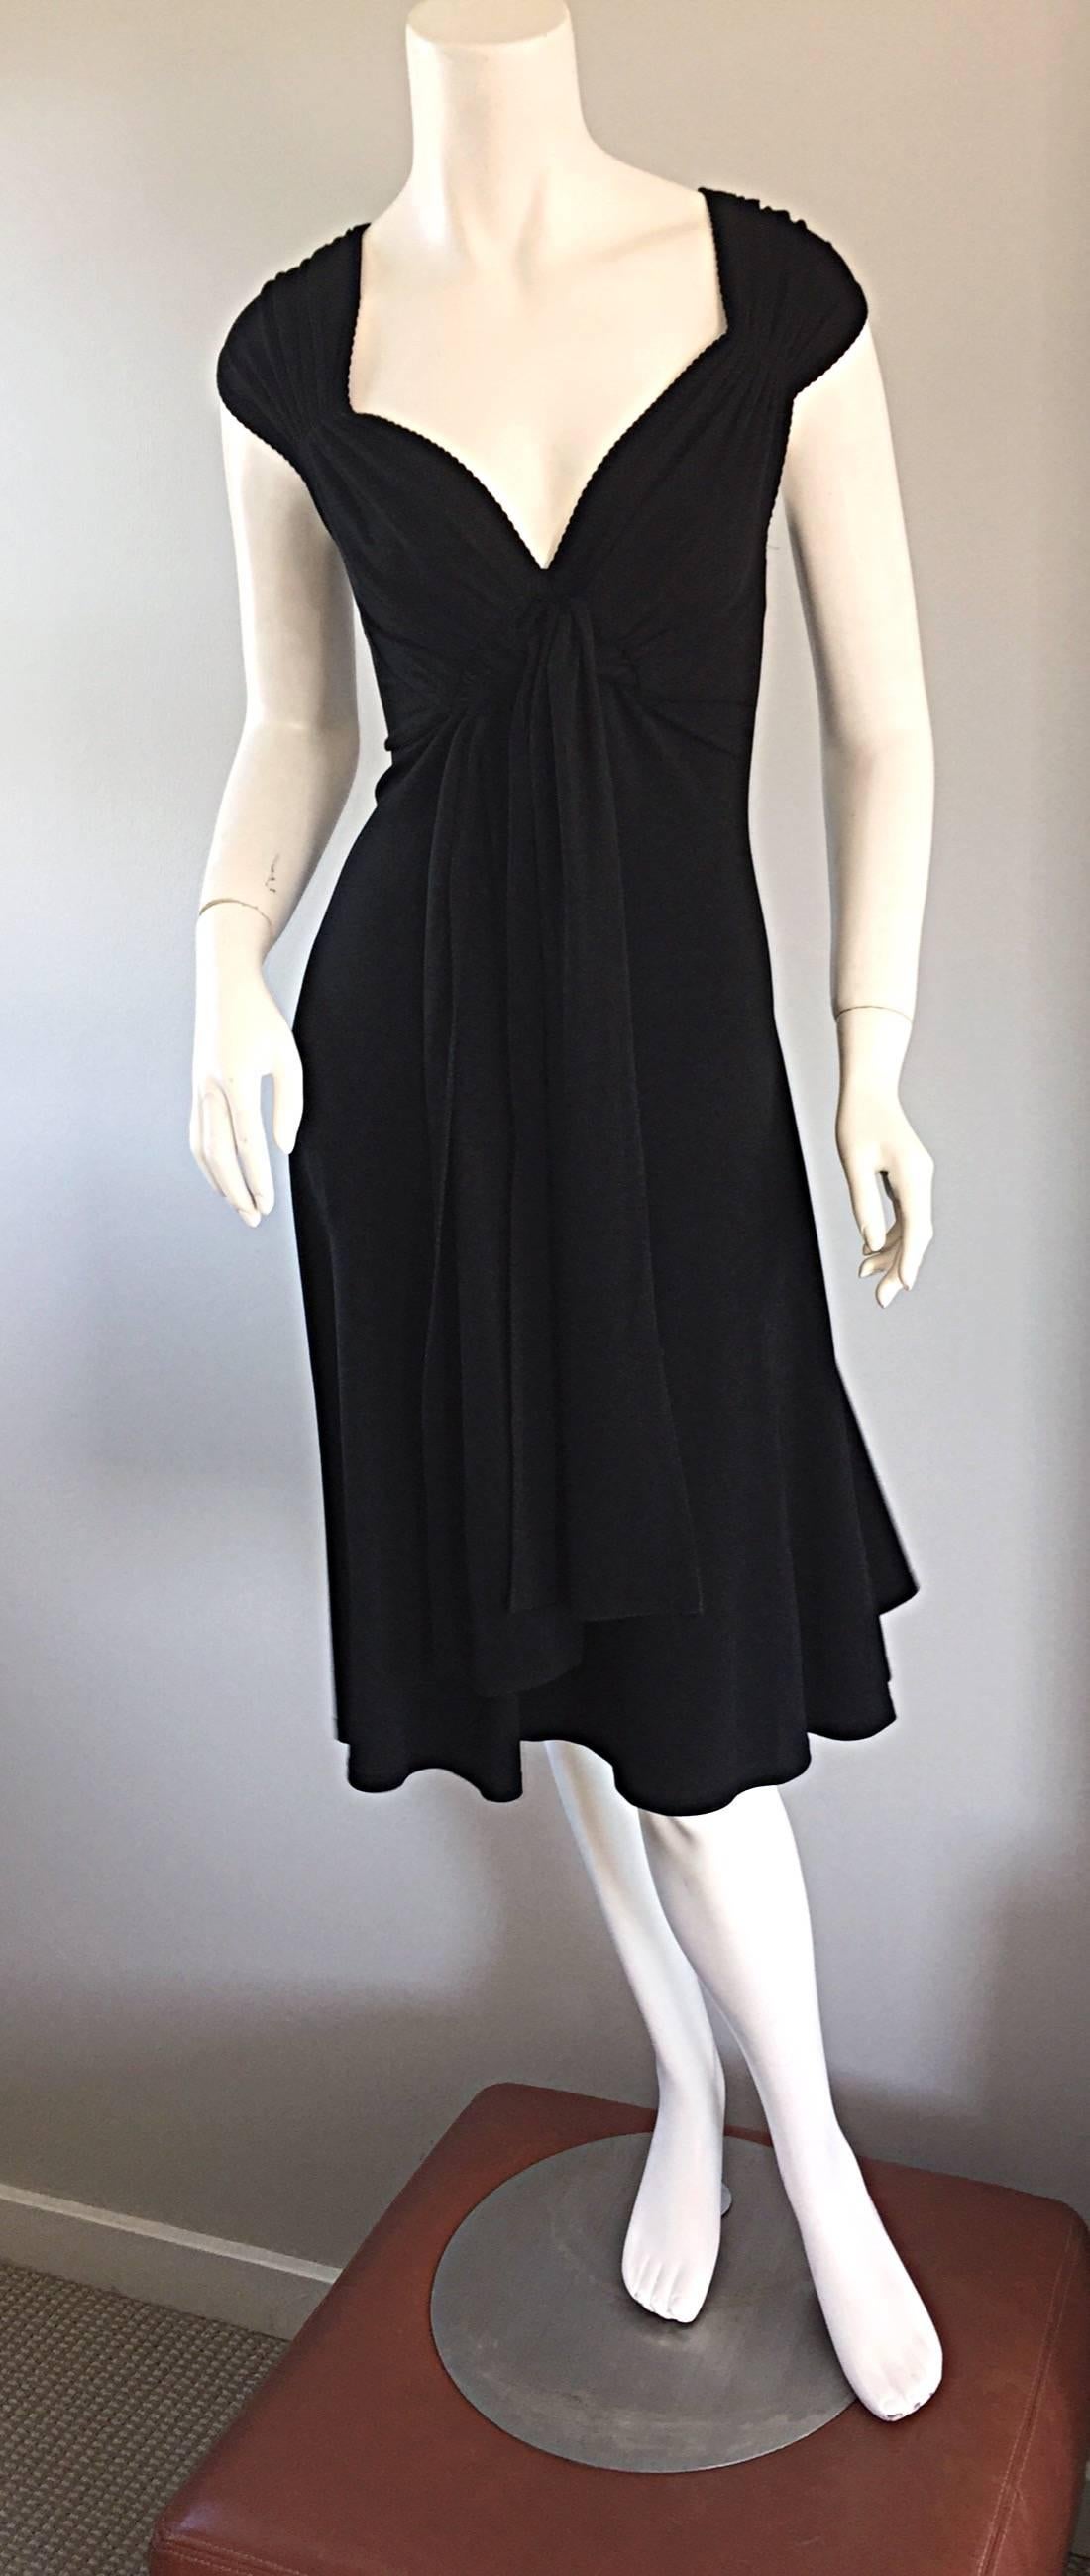 Michael Kors Collection Black Cap Sleeve Jersey Little Black Dress Size 8 LBD In Excellent Condition For Sale In San Diego, CA